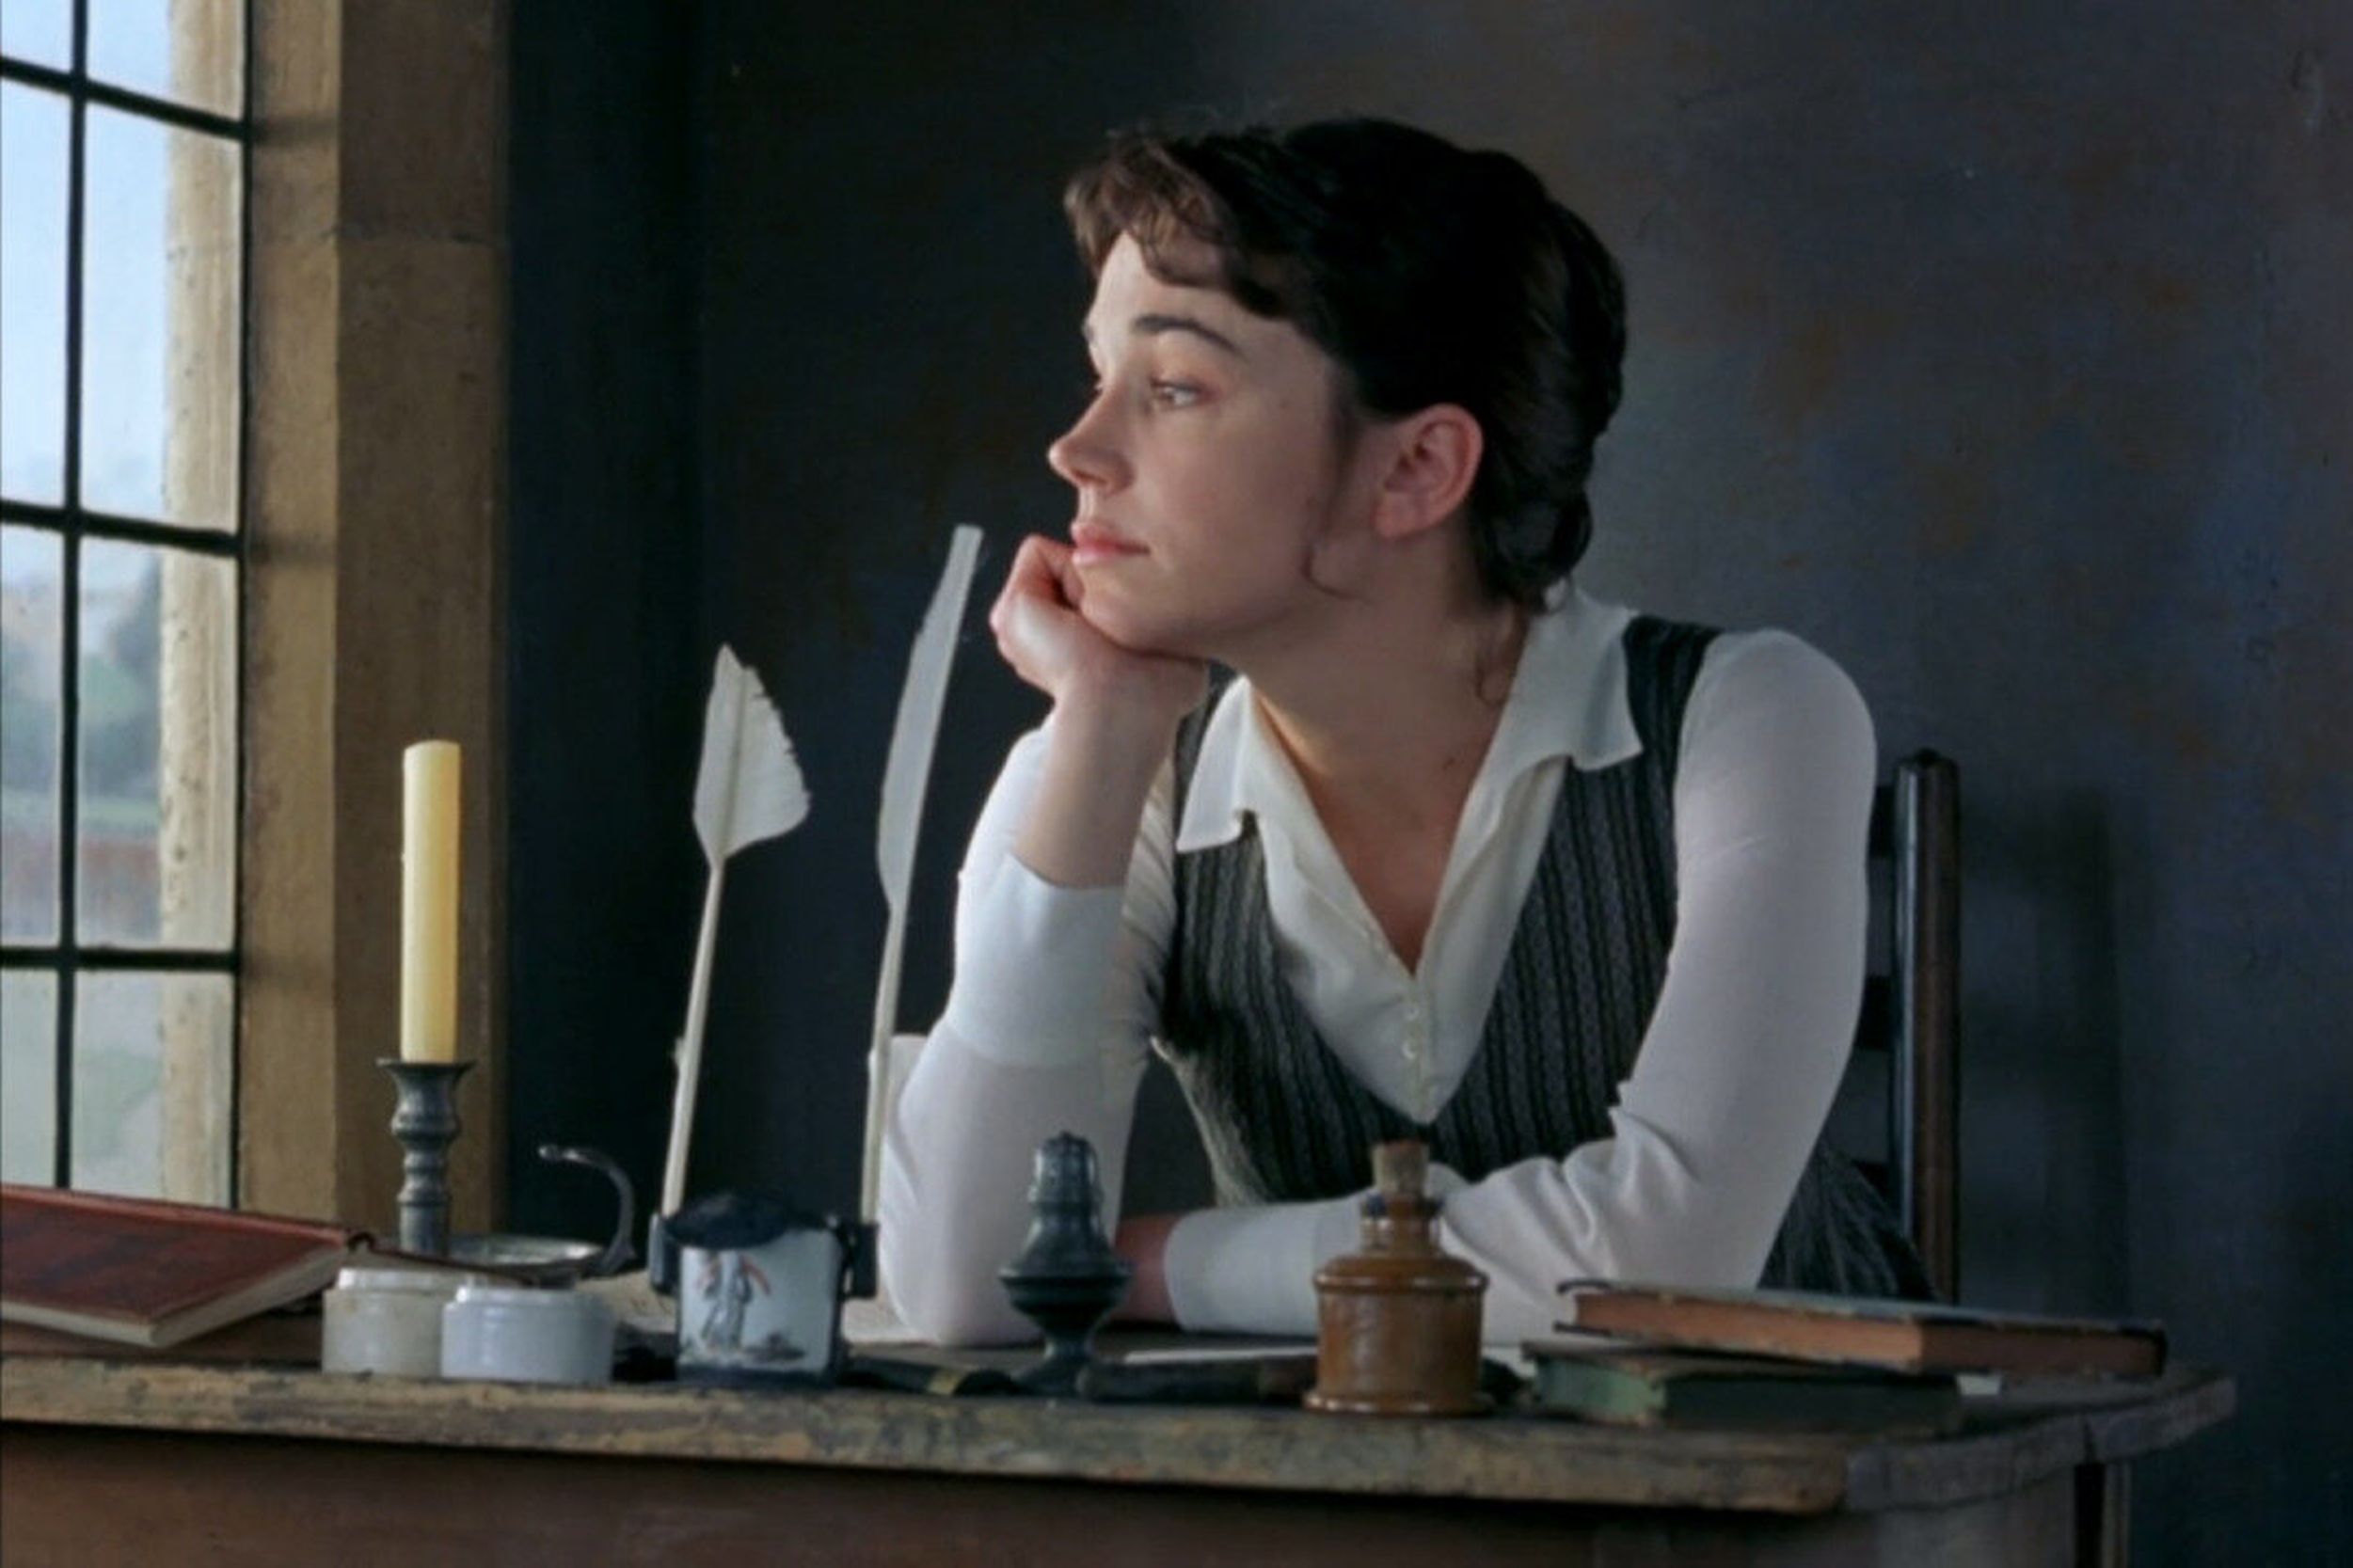 Frances O'Connor as Fanny Price in Mansfield Park